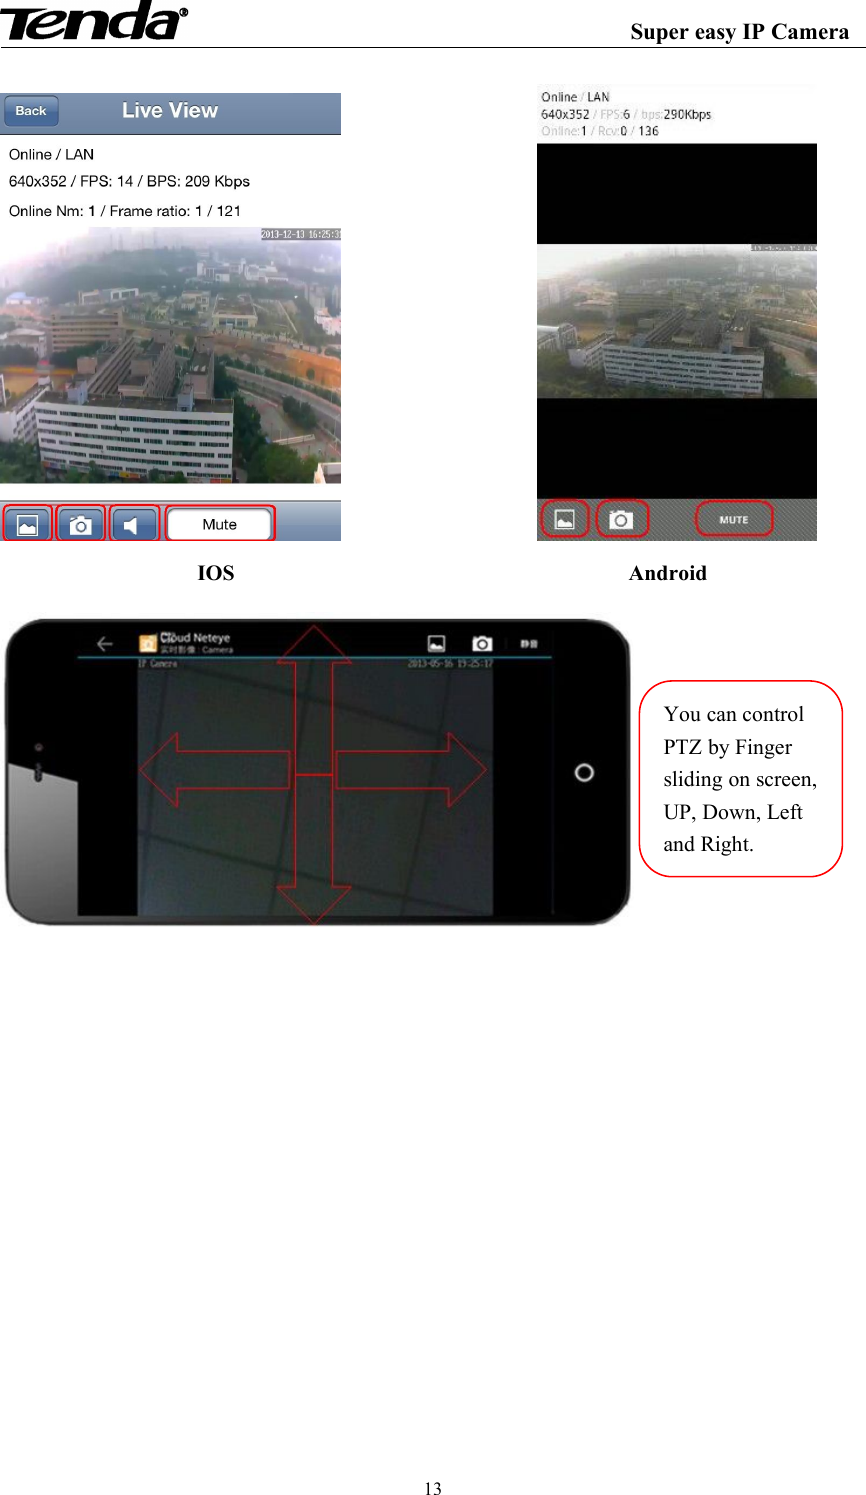 Super easy IP Camera13IOS AndroidYou can controlPTZ by Fingersliding on screen,UP, Down, Leftand Right.